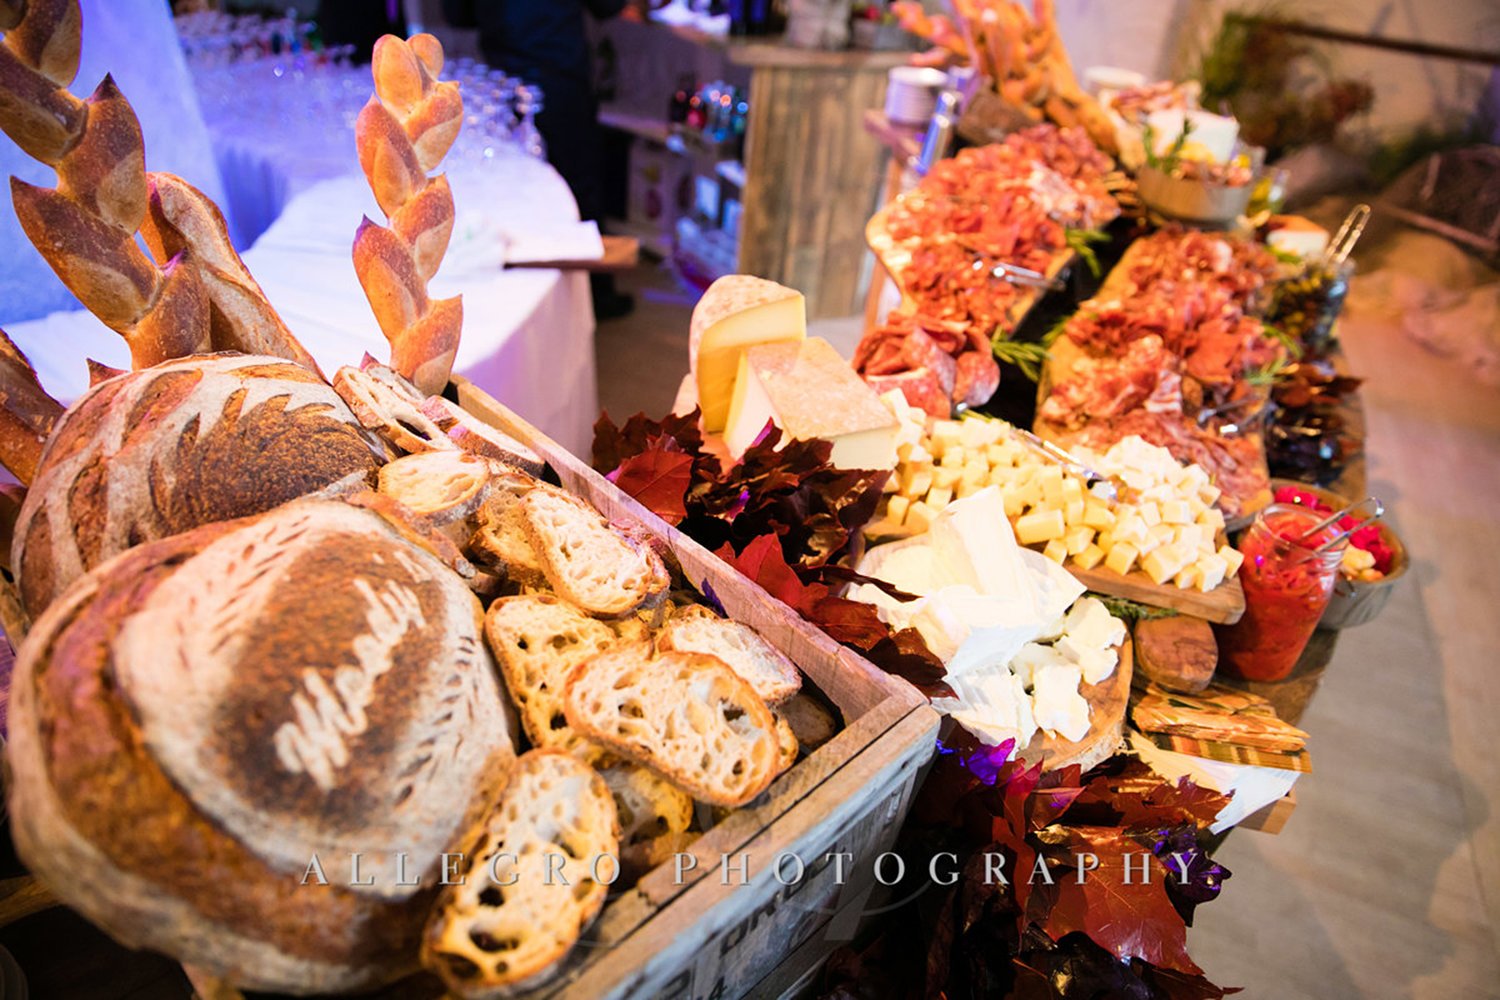 04_Corporate+Client+Appreciation+Charcuterie+Table_AE+Events.jpg